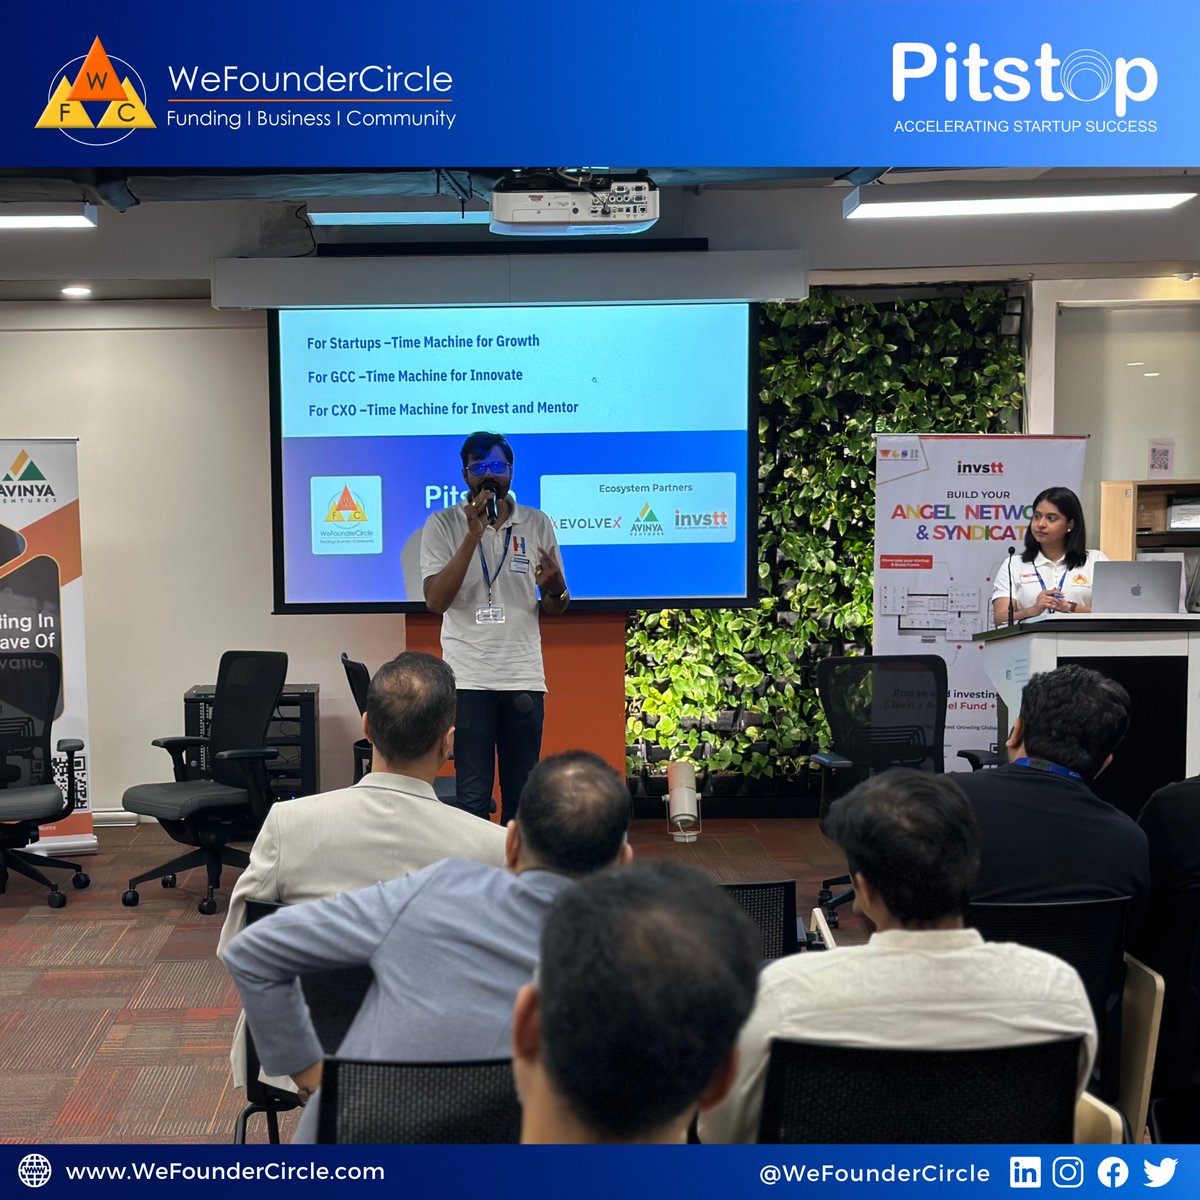 The meet-up featured representatives from Microsoft, Telstra, H&M, Kimberly Clark, JLL, Digikey, Cisco, Magna, ANZ, CIRE, AXAXL, DSM, and Mindsprint. They shared their insights and expressed their interest in collaborating with our startups.

#globalcapabilitycentres #innovation